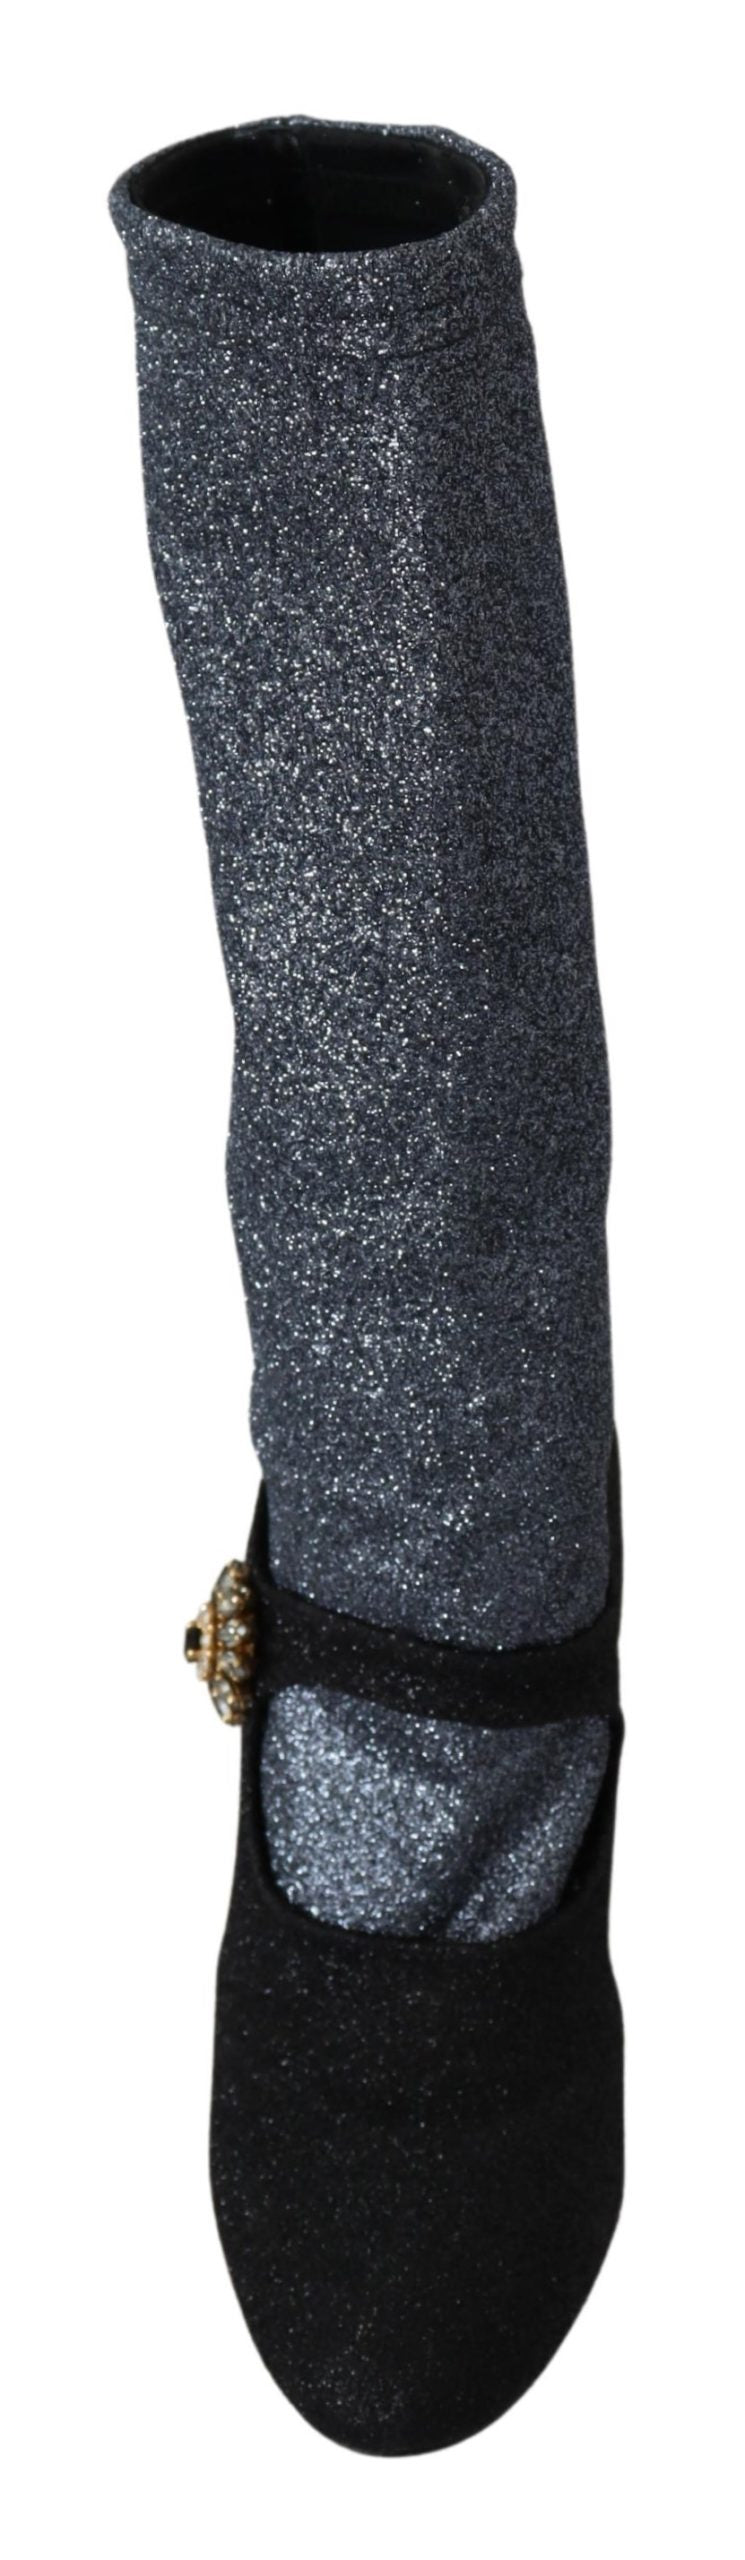 Dolce & Gabbana Black Crystal Glitter Boots Shoes - Cicis Boutique